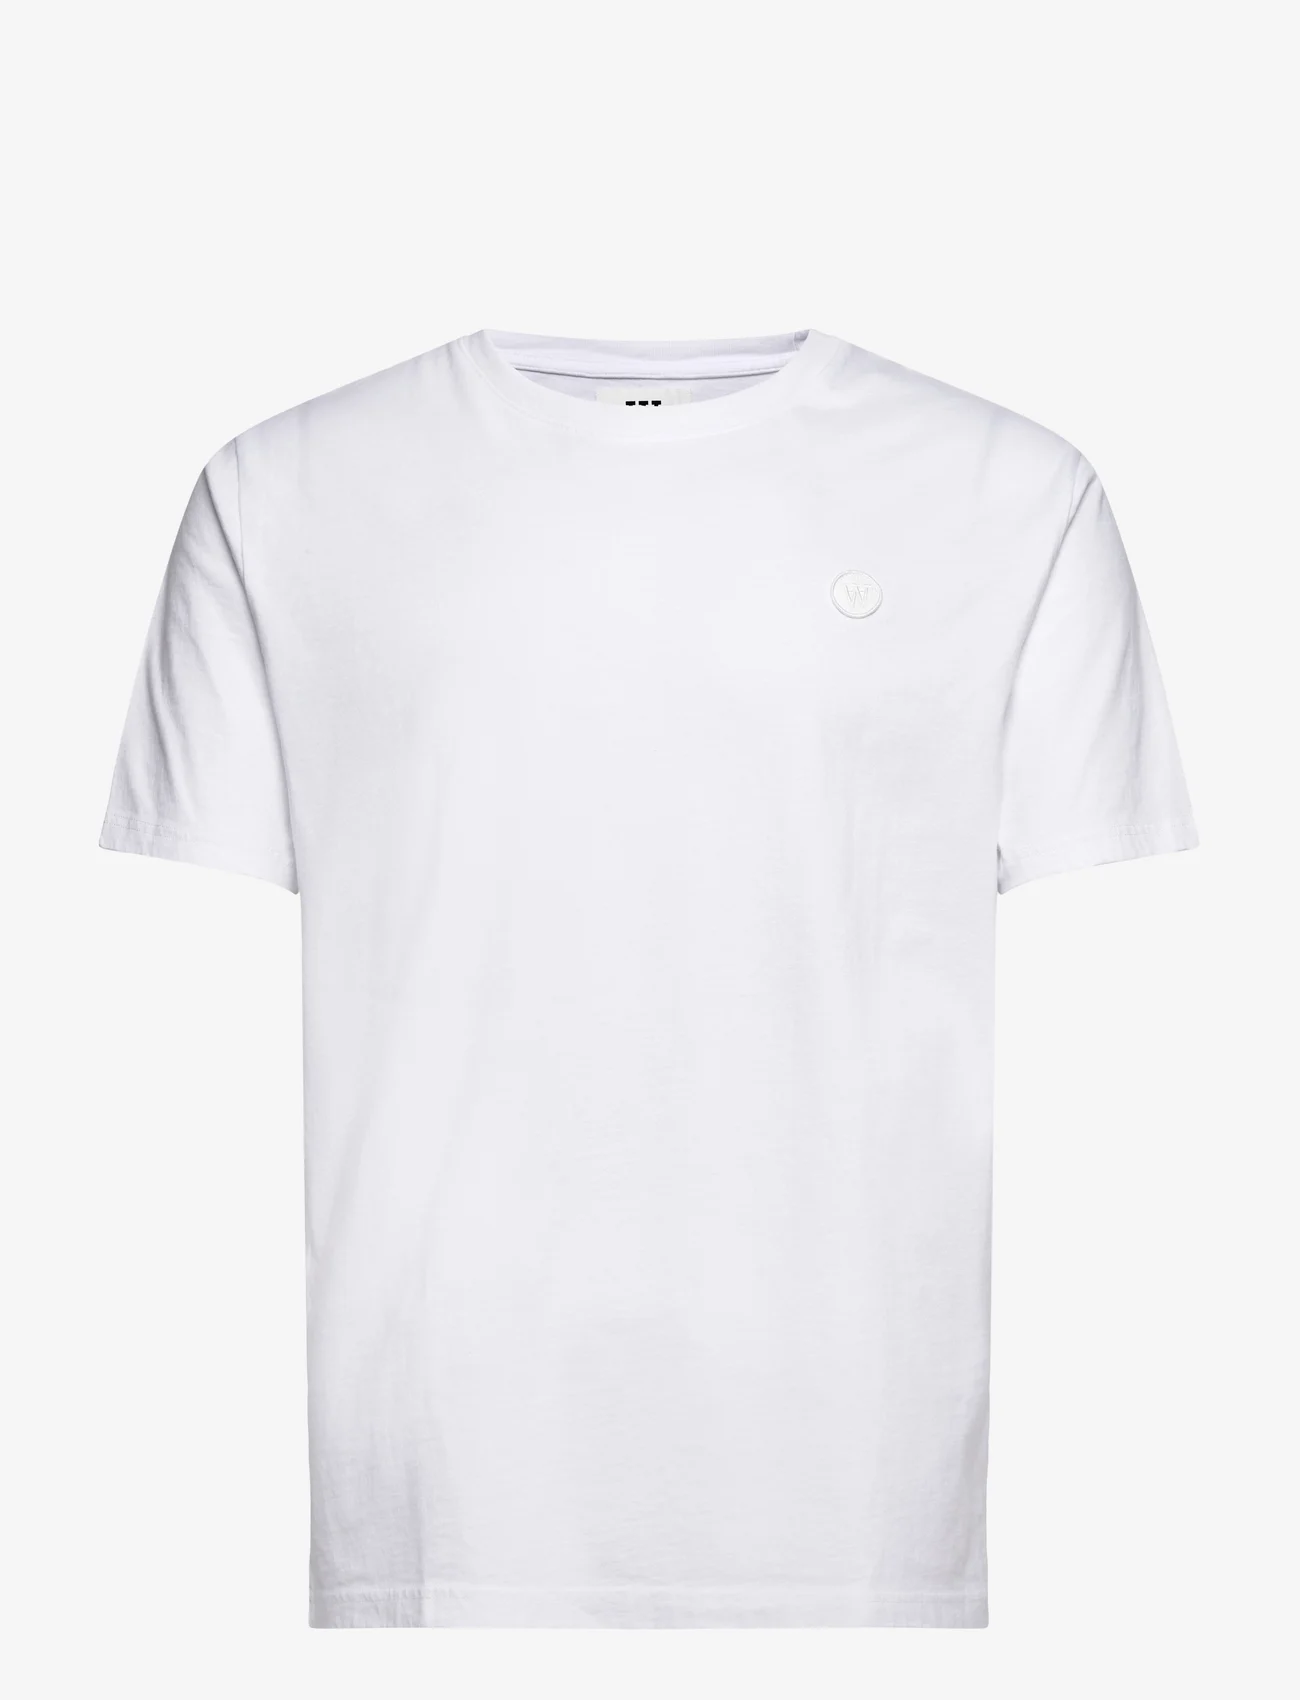 Double A by Wood Wood - Ace T-shirt - basic t-shirts - white/white - 0